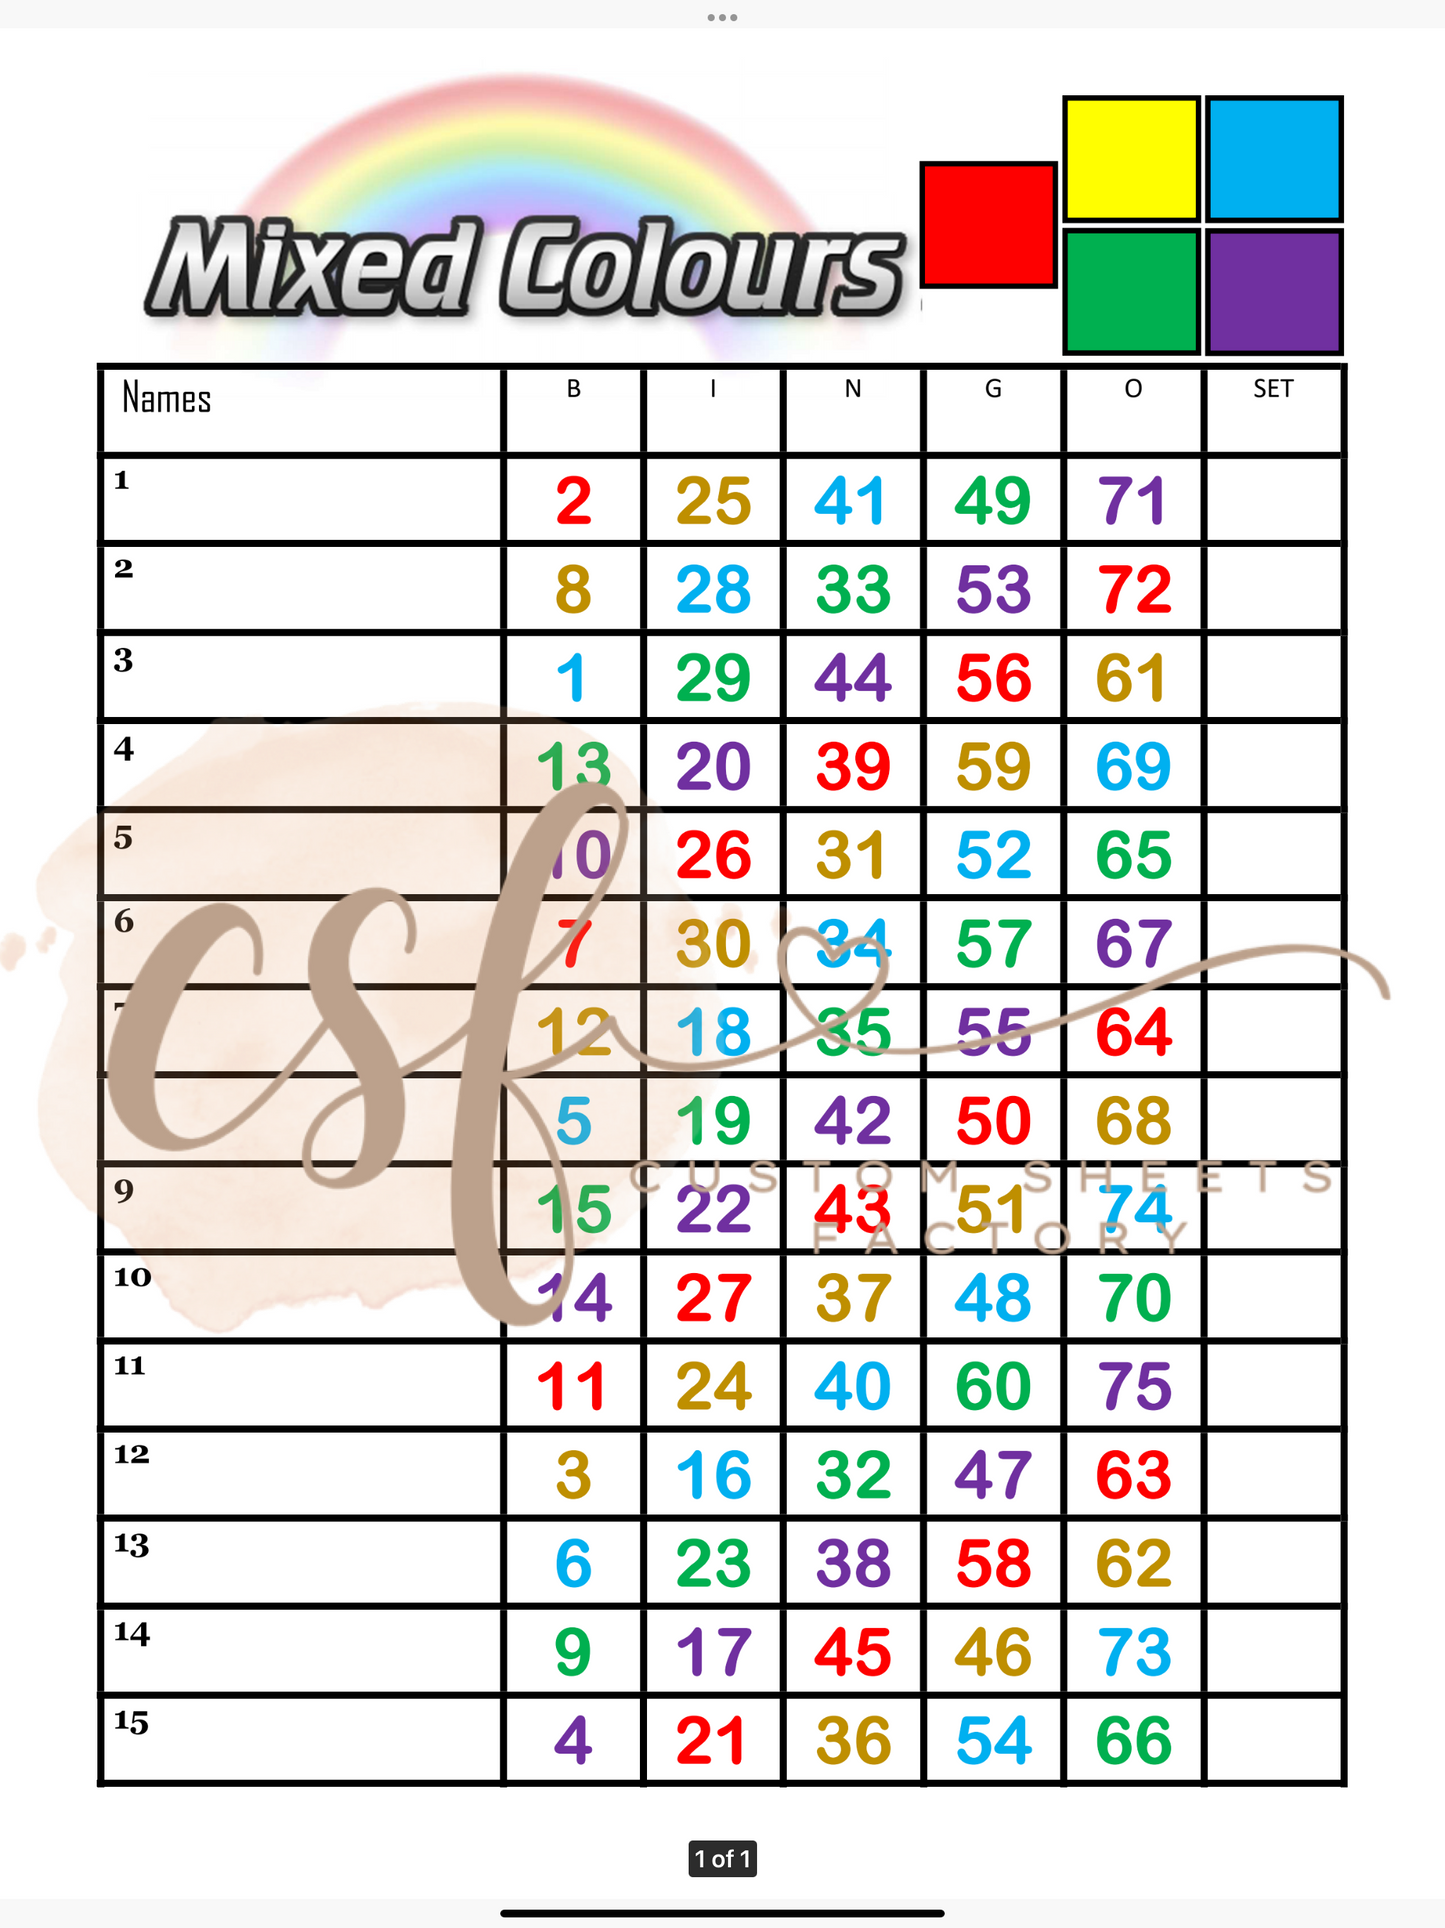 Mixed Colours - 15 line - 75 ball